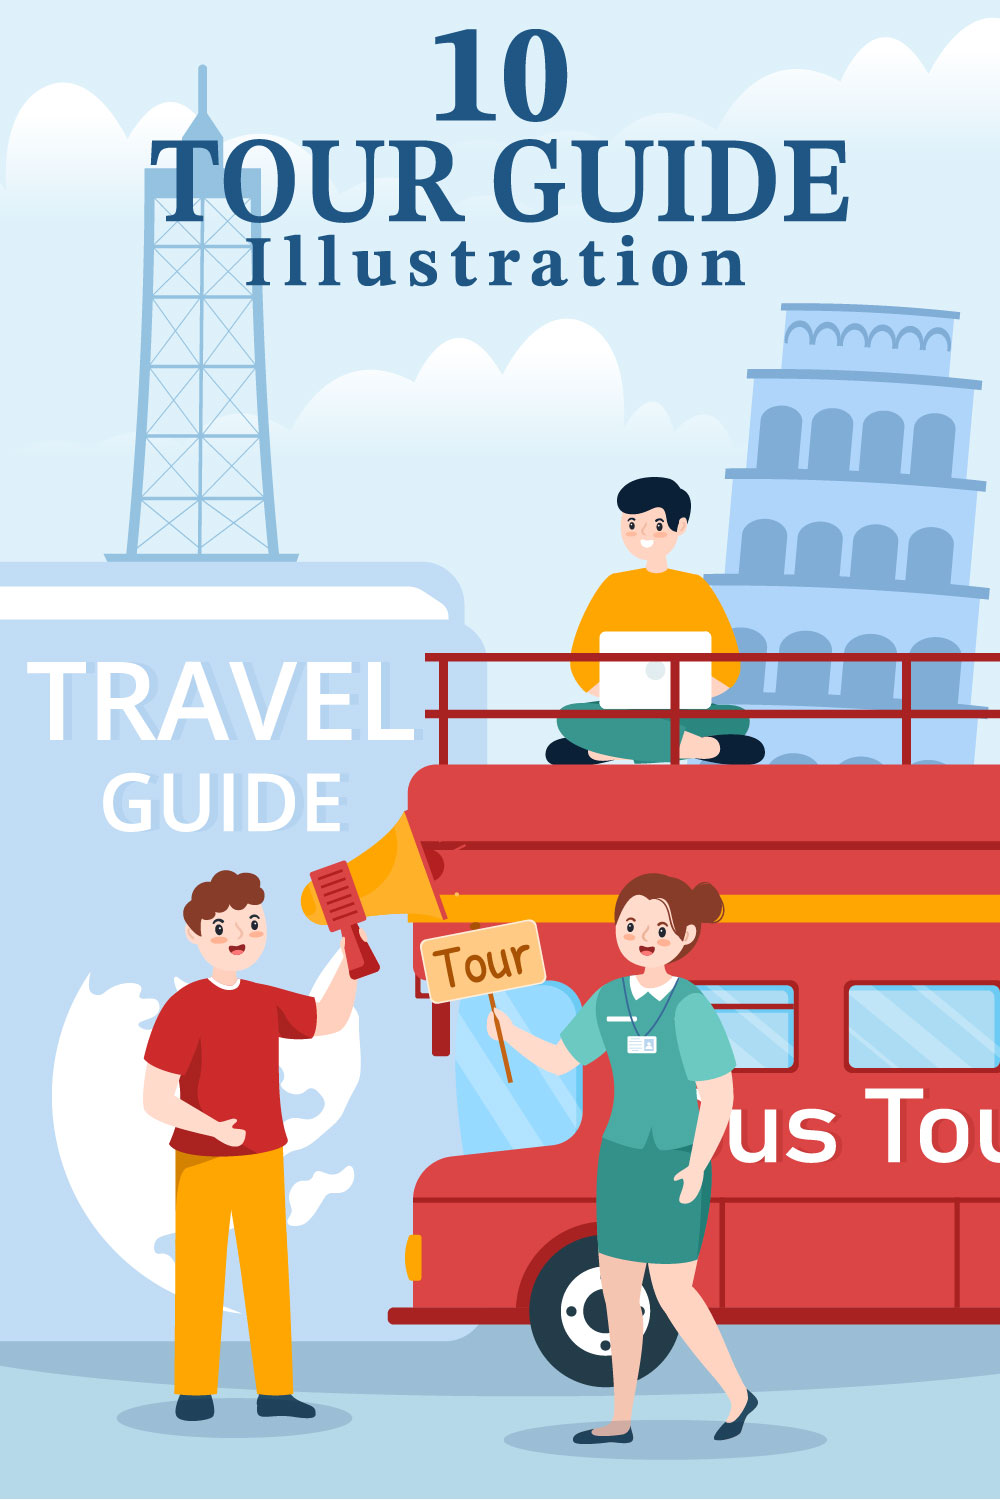 10 Travel Guide And Tour Illustration - pinterest image preview.